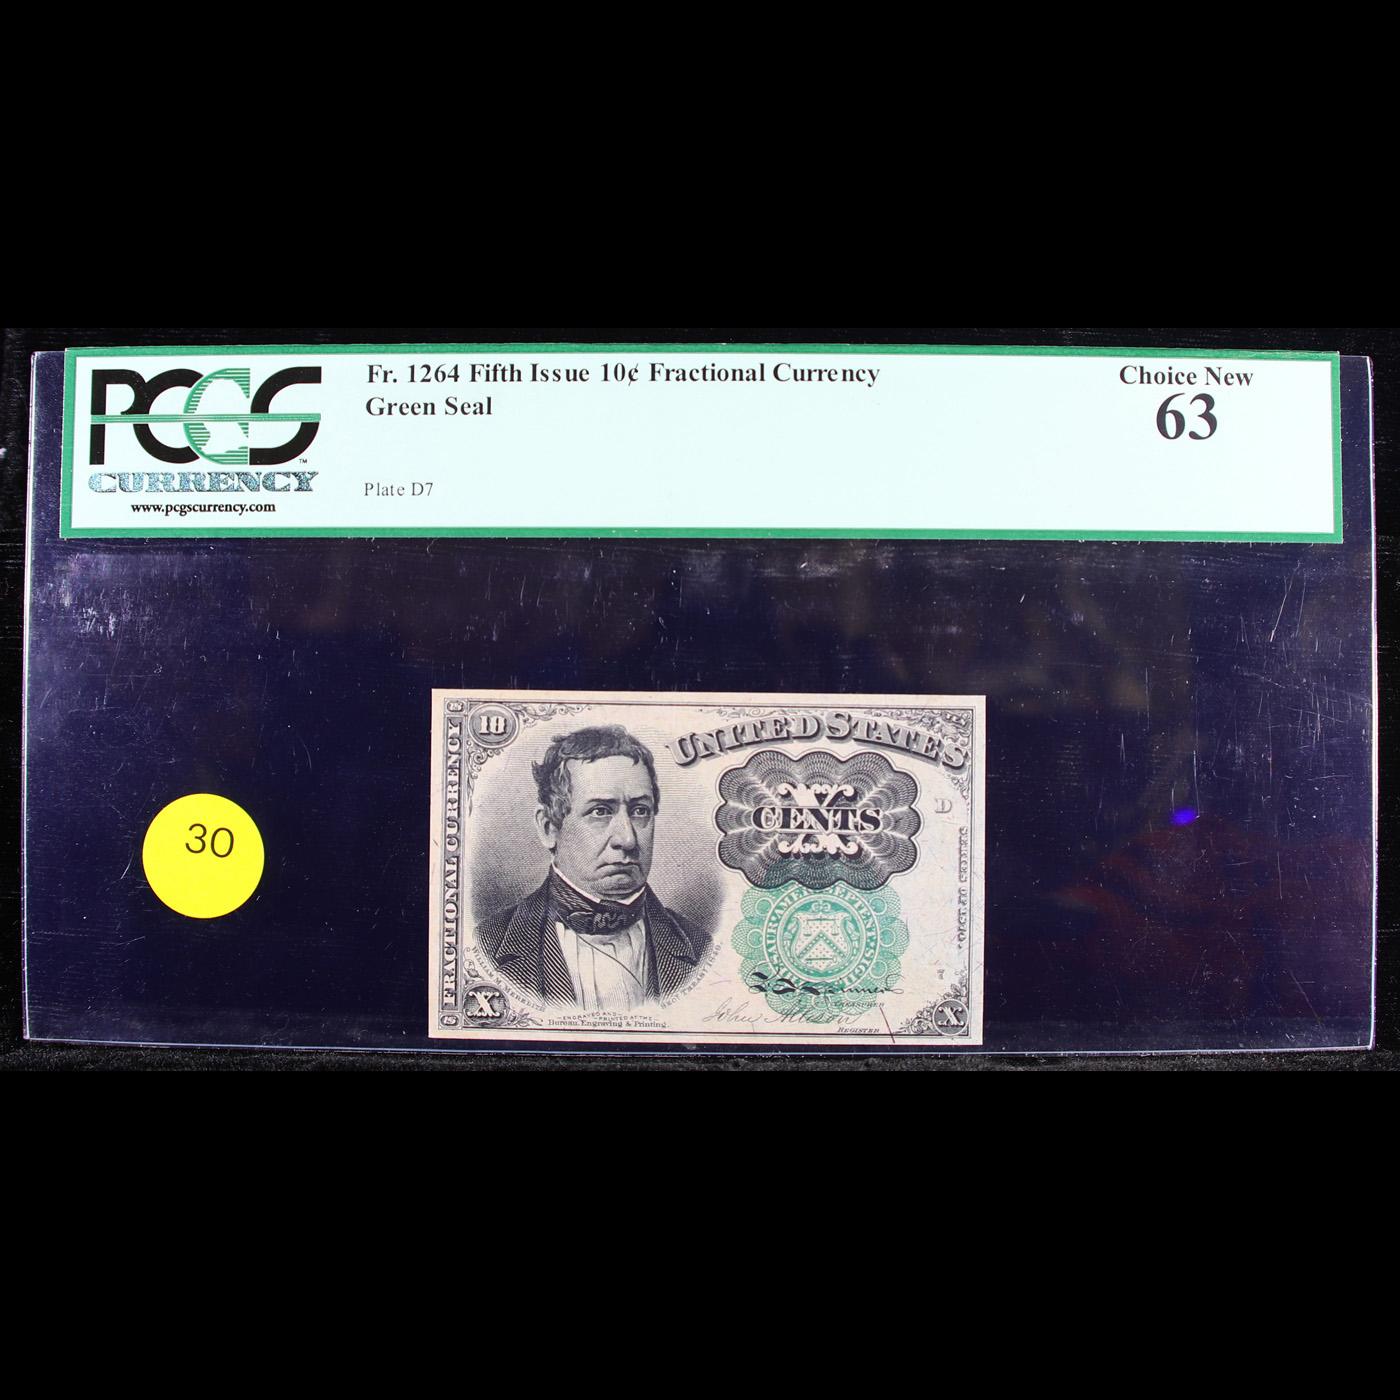 PCGS 1875 US Fractional Currency 10c Fifth Issue fr-1264 Green Seal Graded cu63 By PCGS